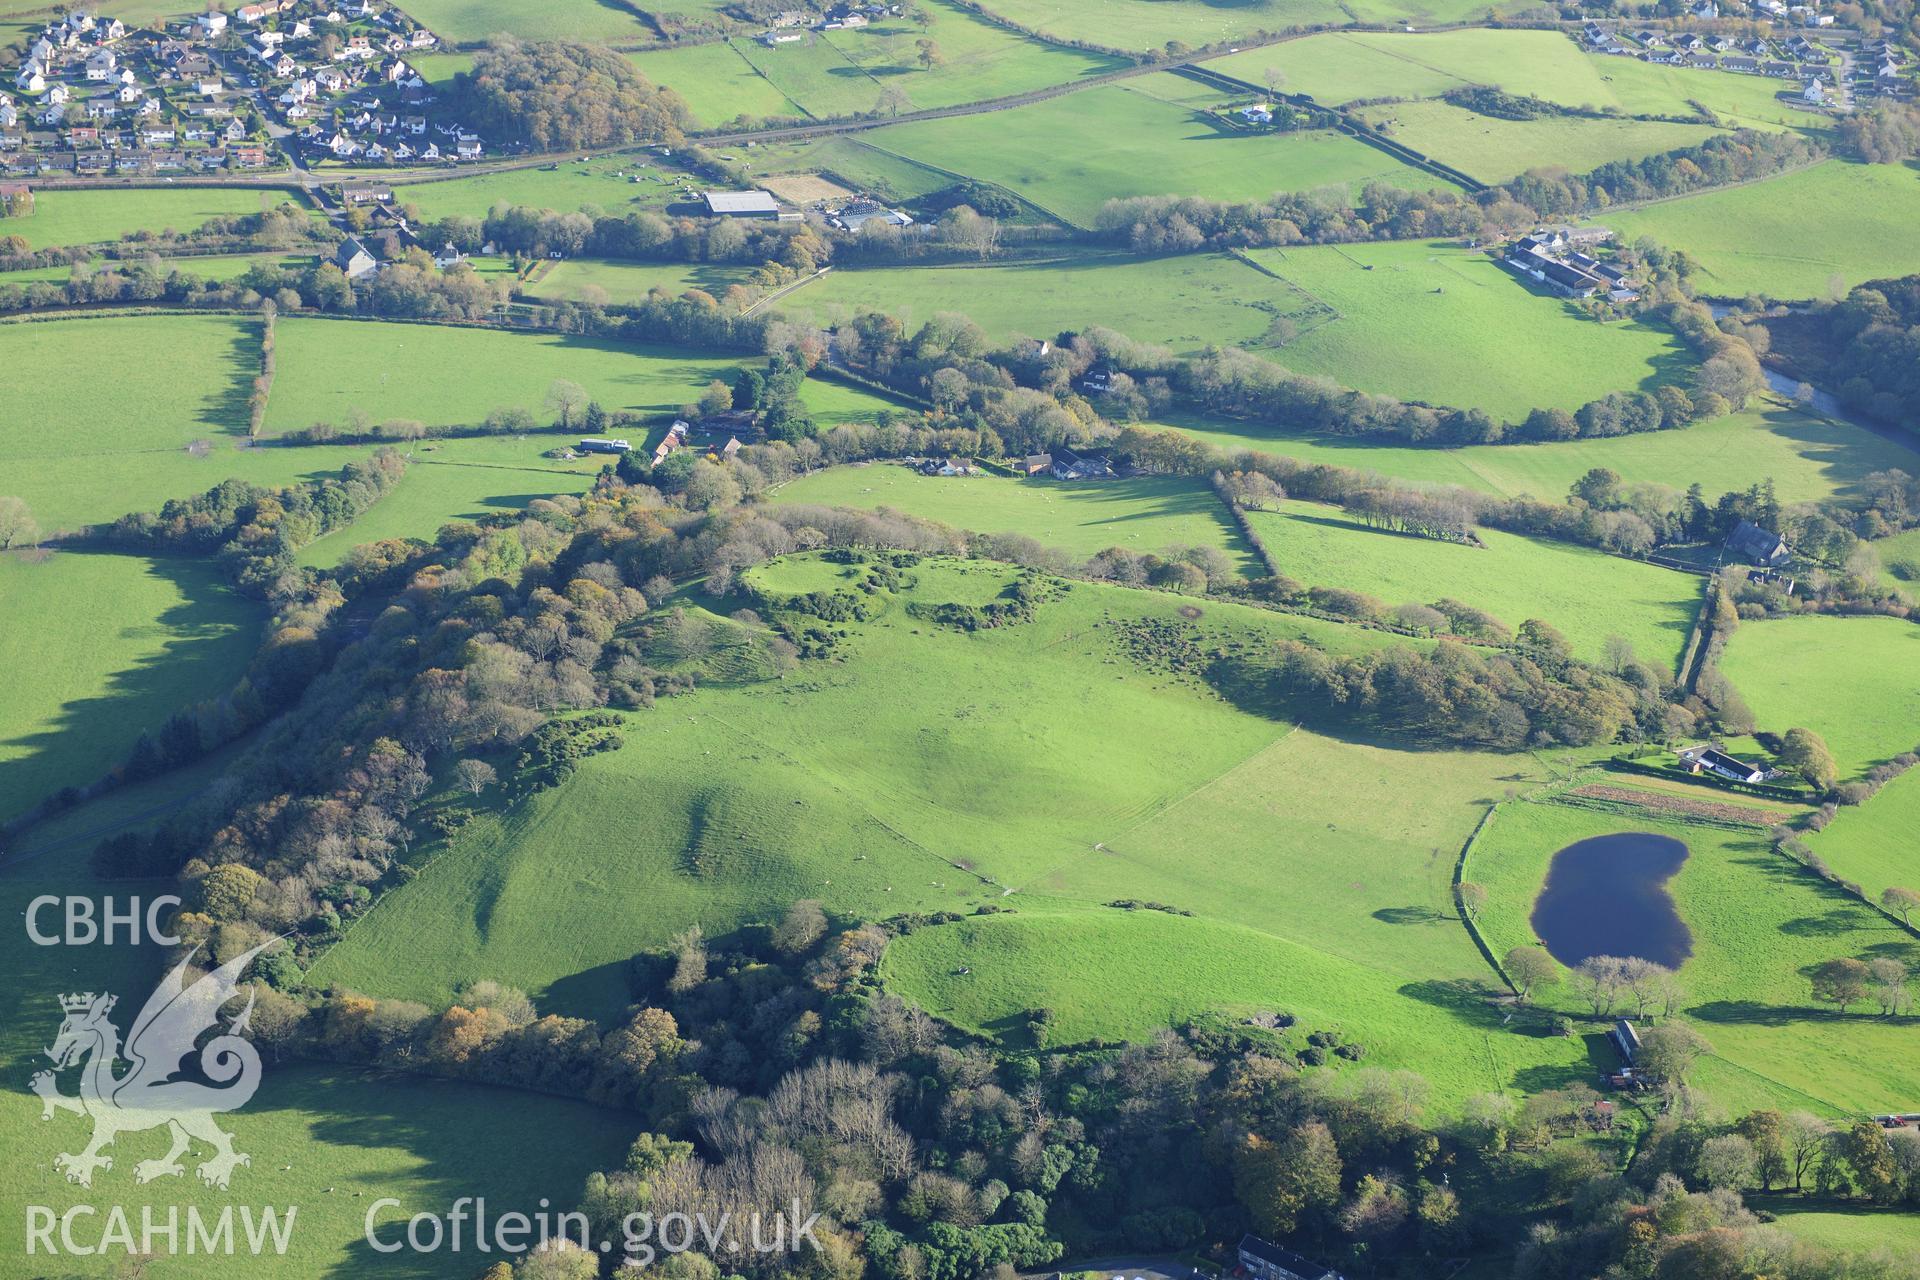 RCAHMW colour oblique photograph of Castell Tan-y-castell. Taken by Toby Driver on 05/11/2012.